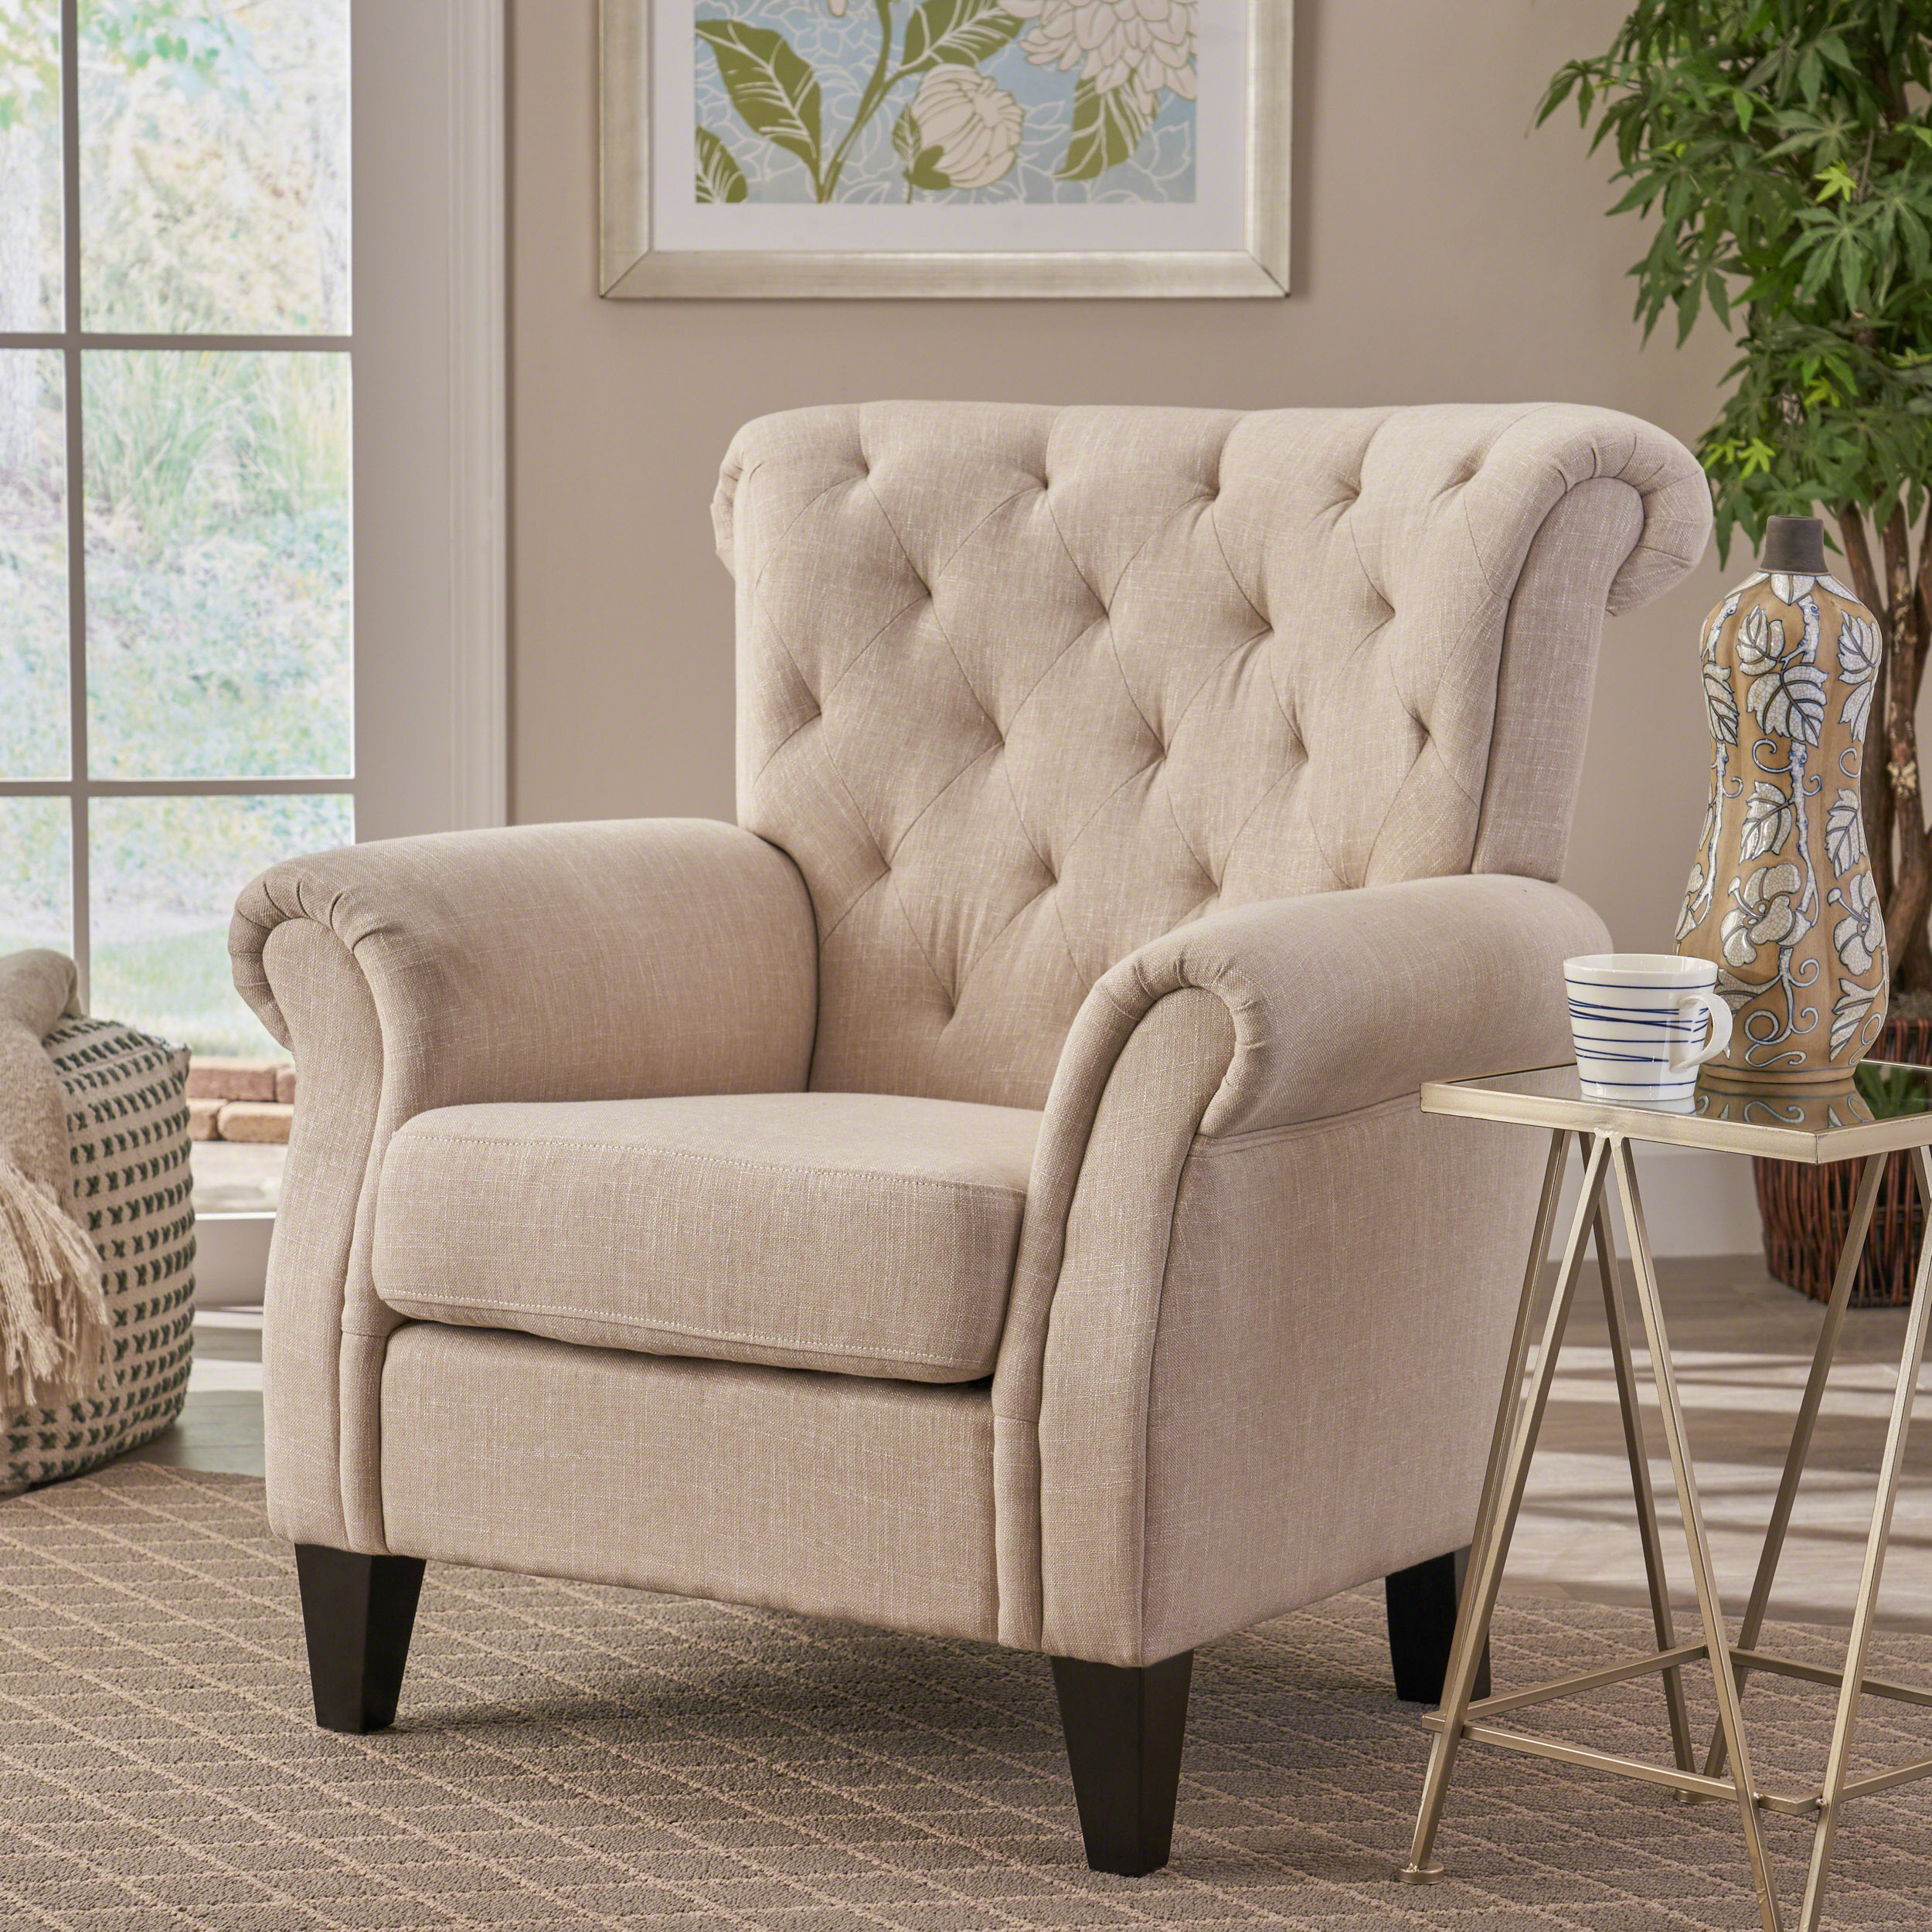 Solvang Tufted Club Chair - Fabric, Beige